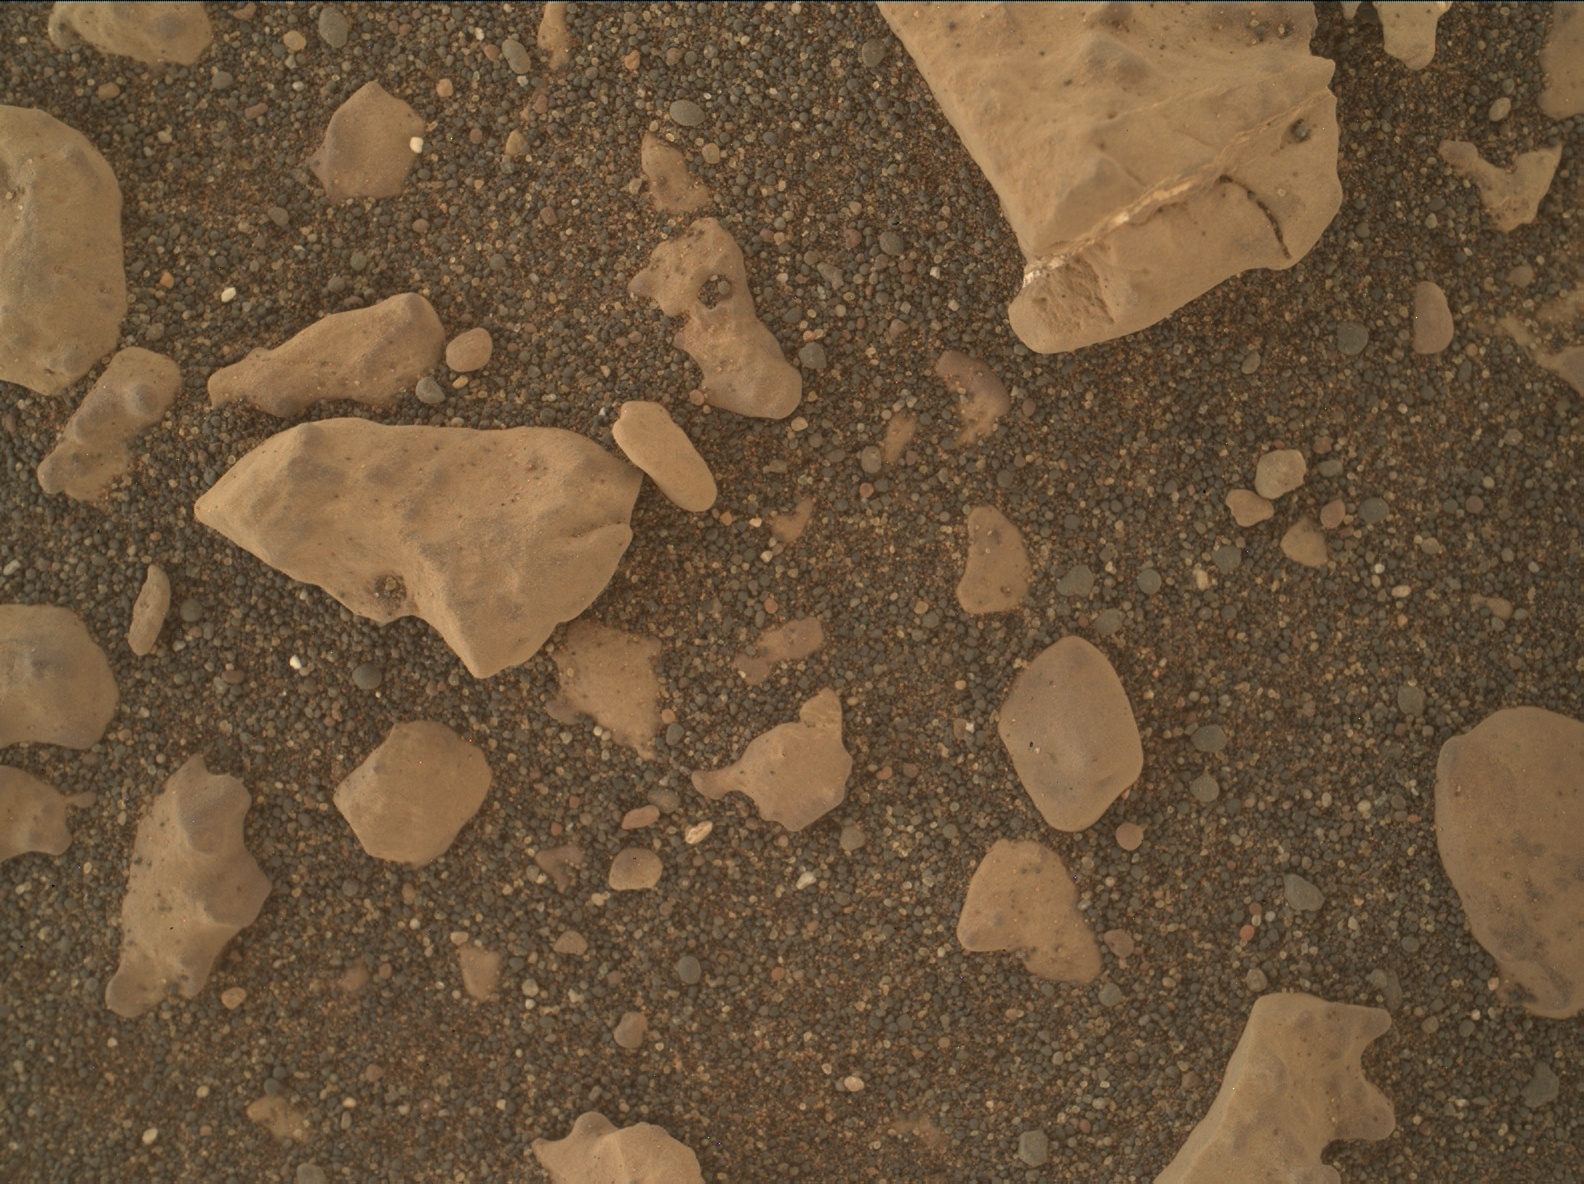 Nasa's Mars rover Curiosity acquired this image using its Mars Hand Lens Imager (MAHLI) on Sol 3035